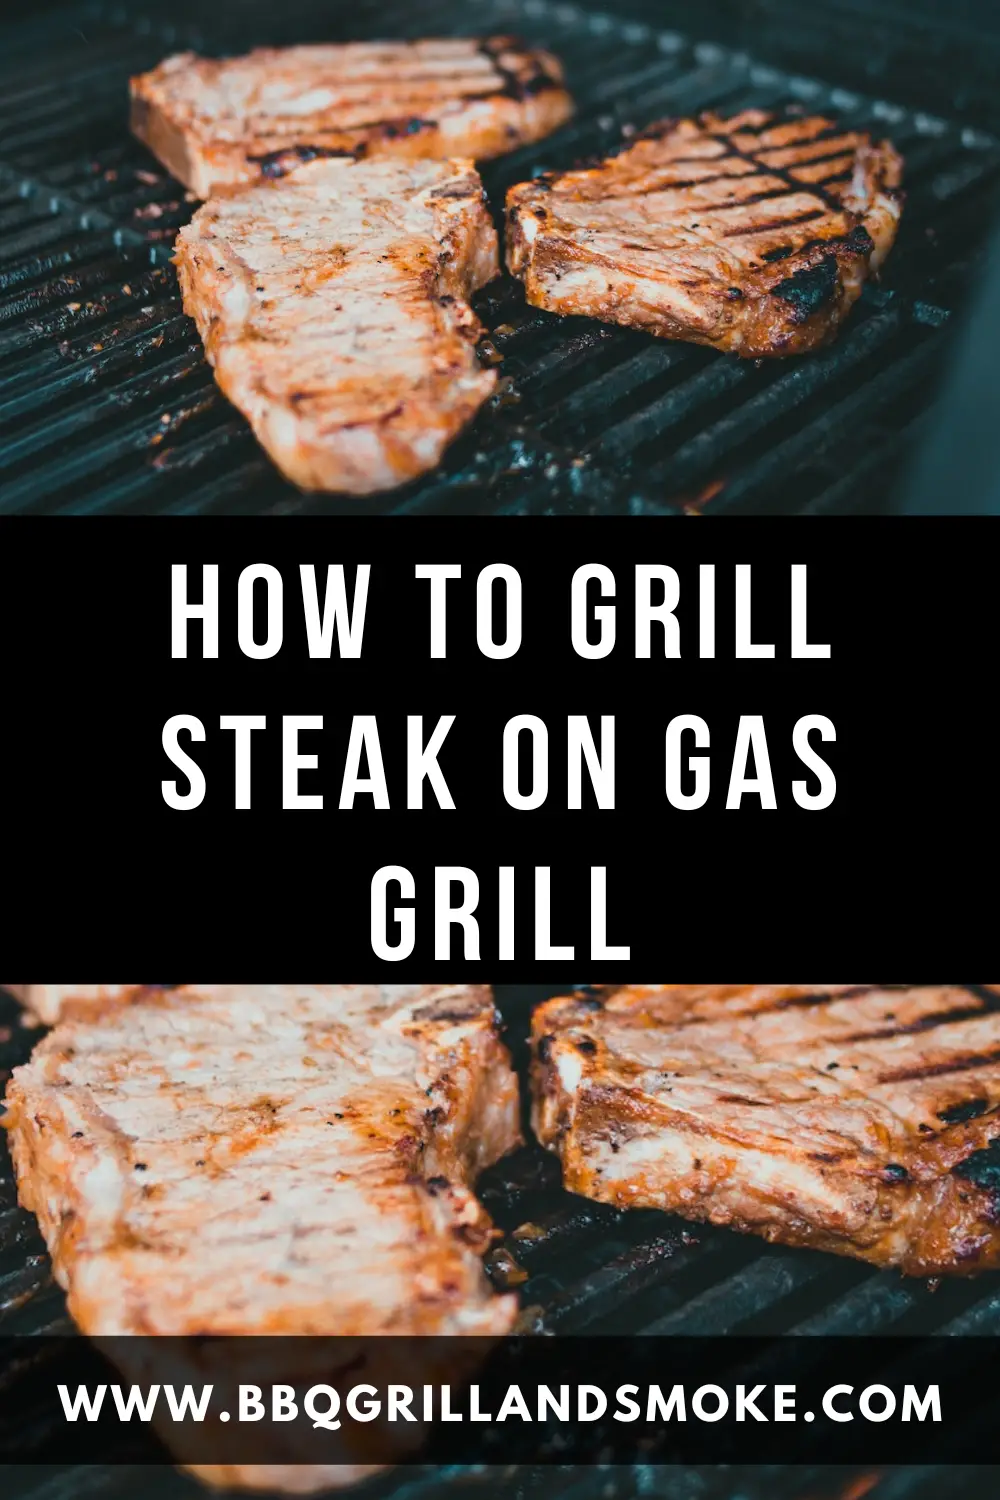 How To Grill Steak On Gas Grill